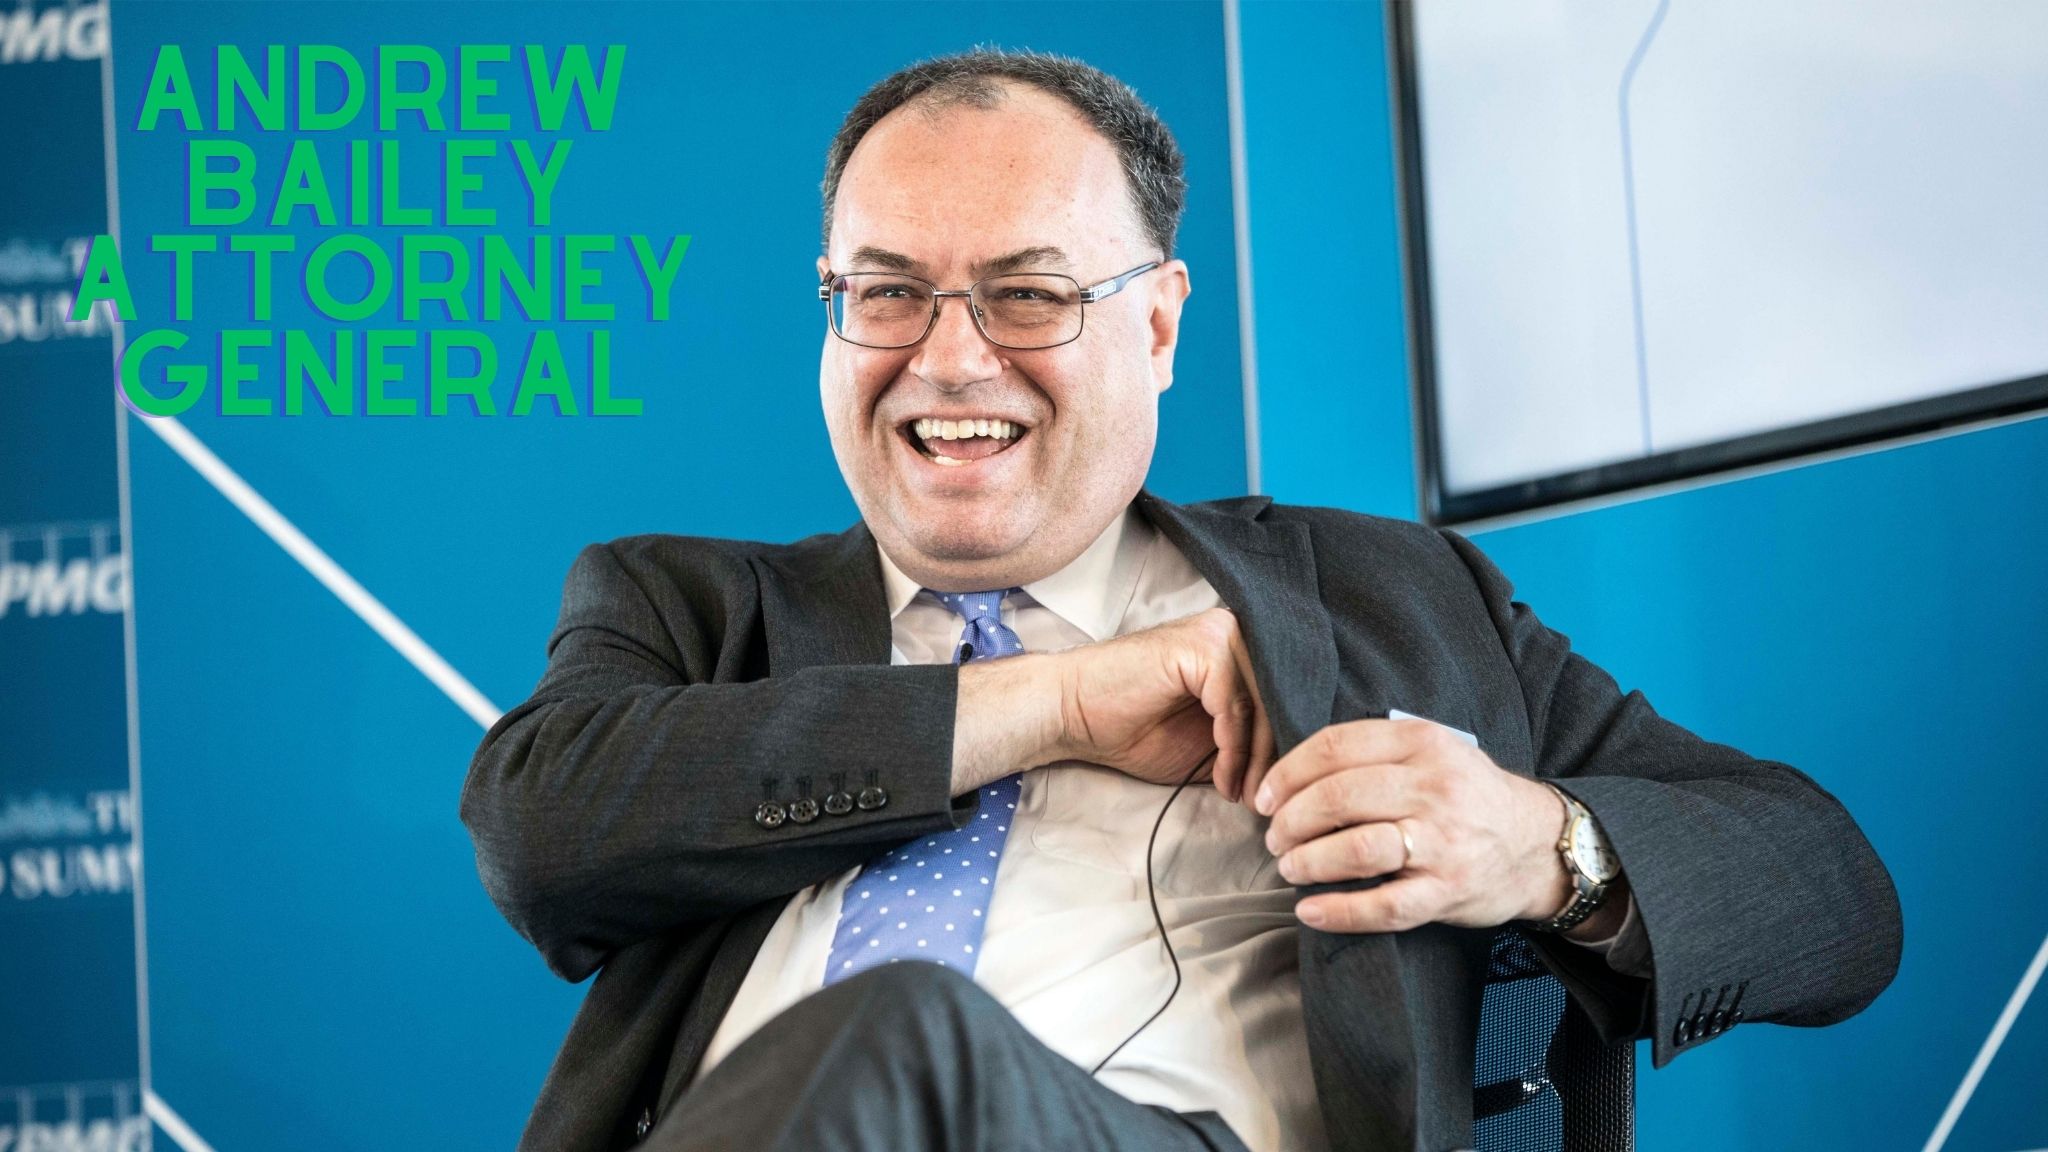 Legal Labyrinths Unraveled: Deciphering Andrew Bailey's Odyssey as Attorney General